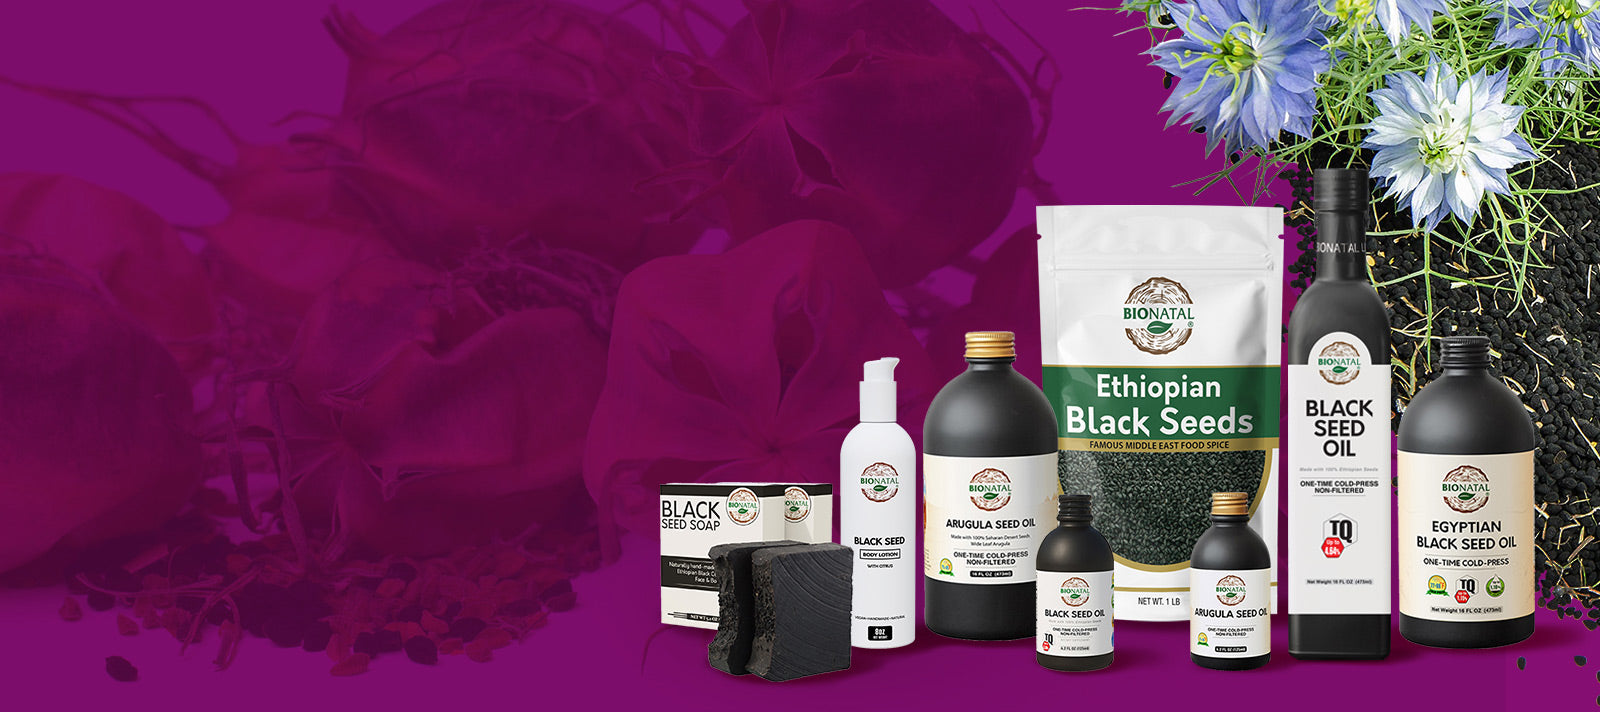 Strongest black seed oil
in the market